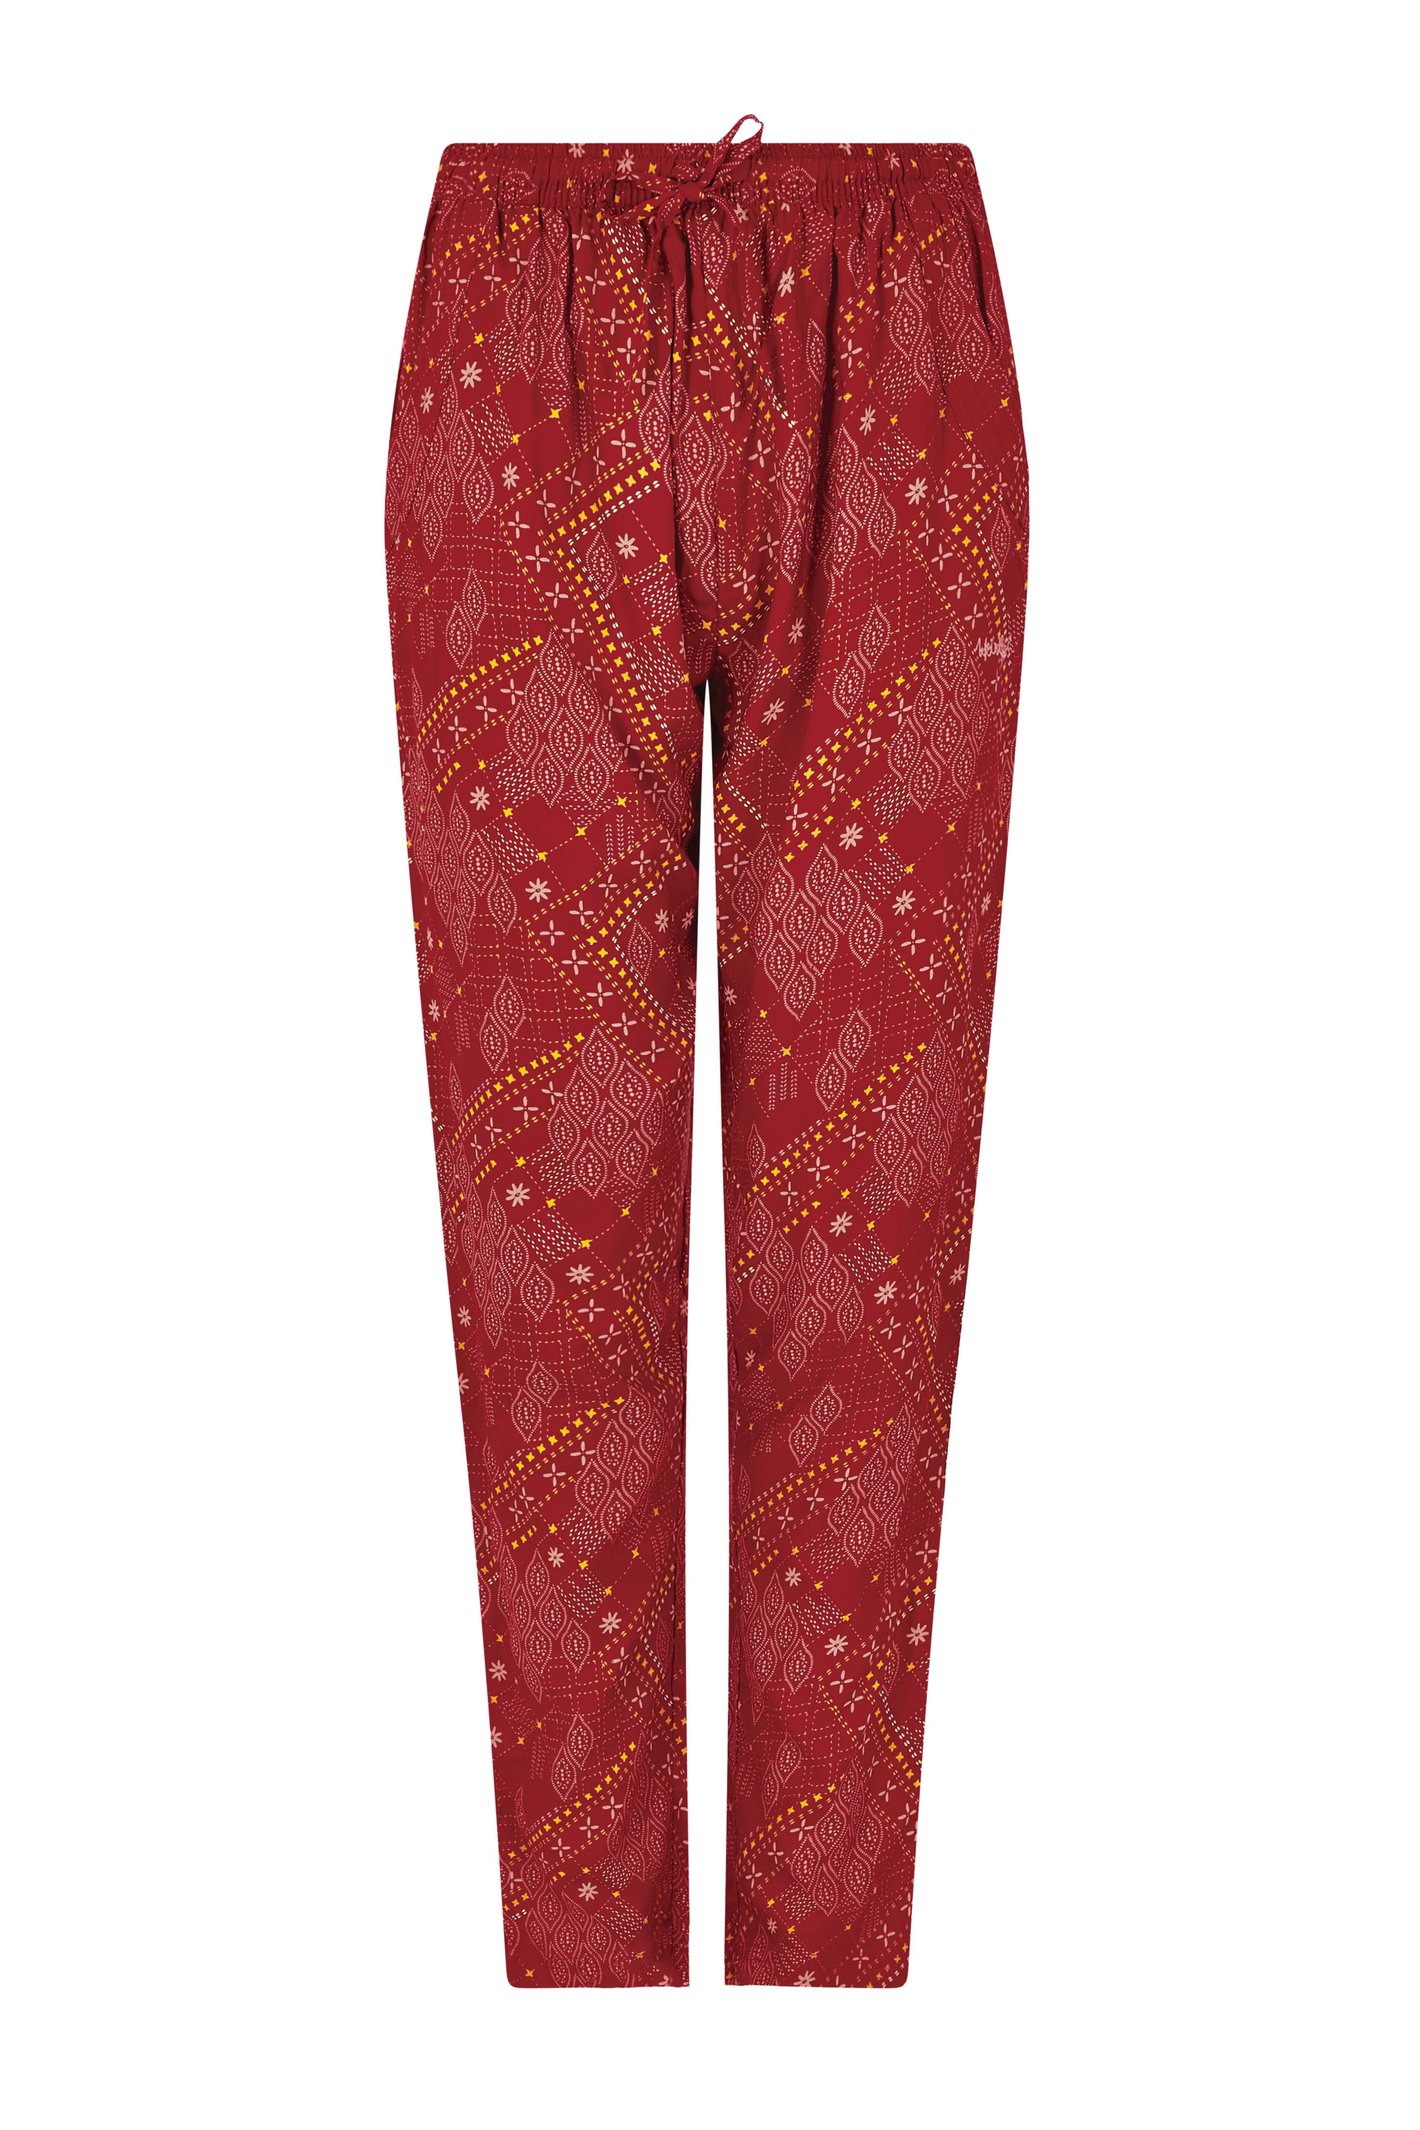 Weird Fish Tinto Eco Viscose Printed Trousers Chilli Red Size 12